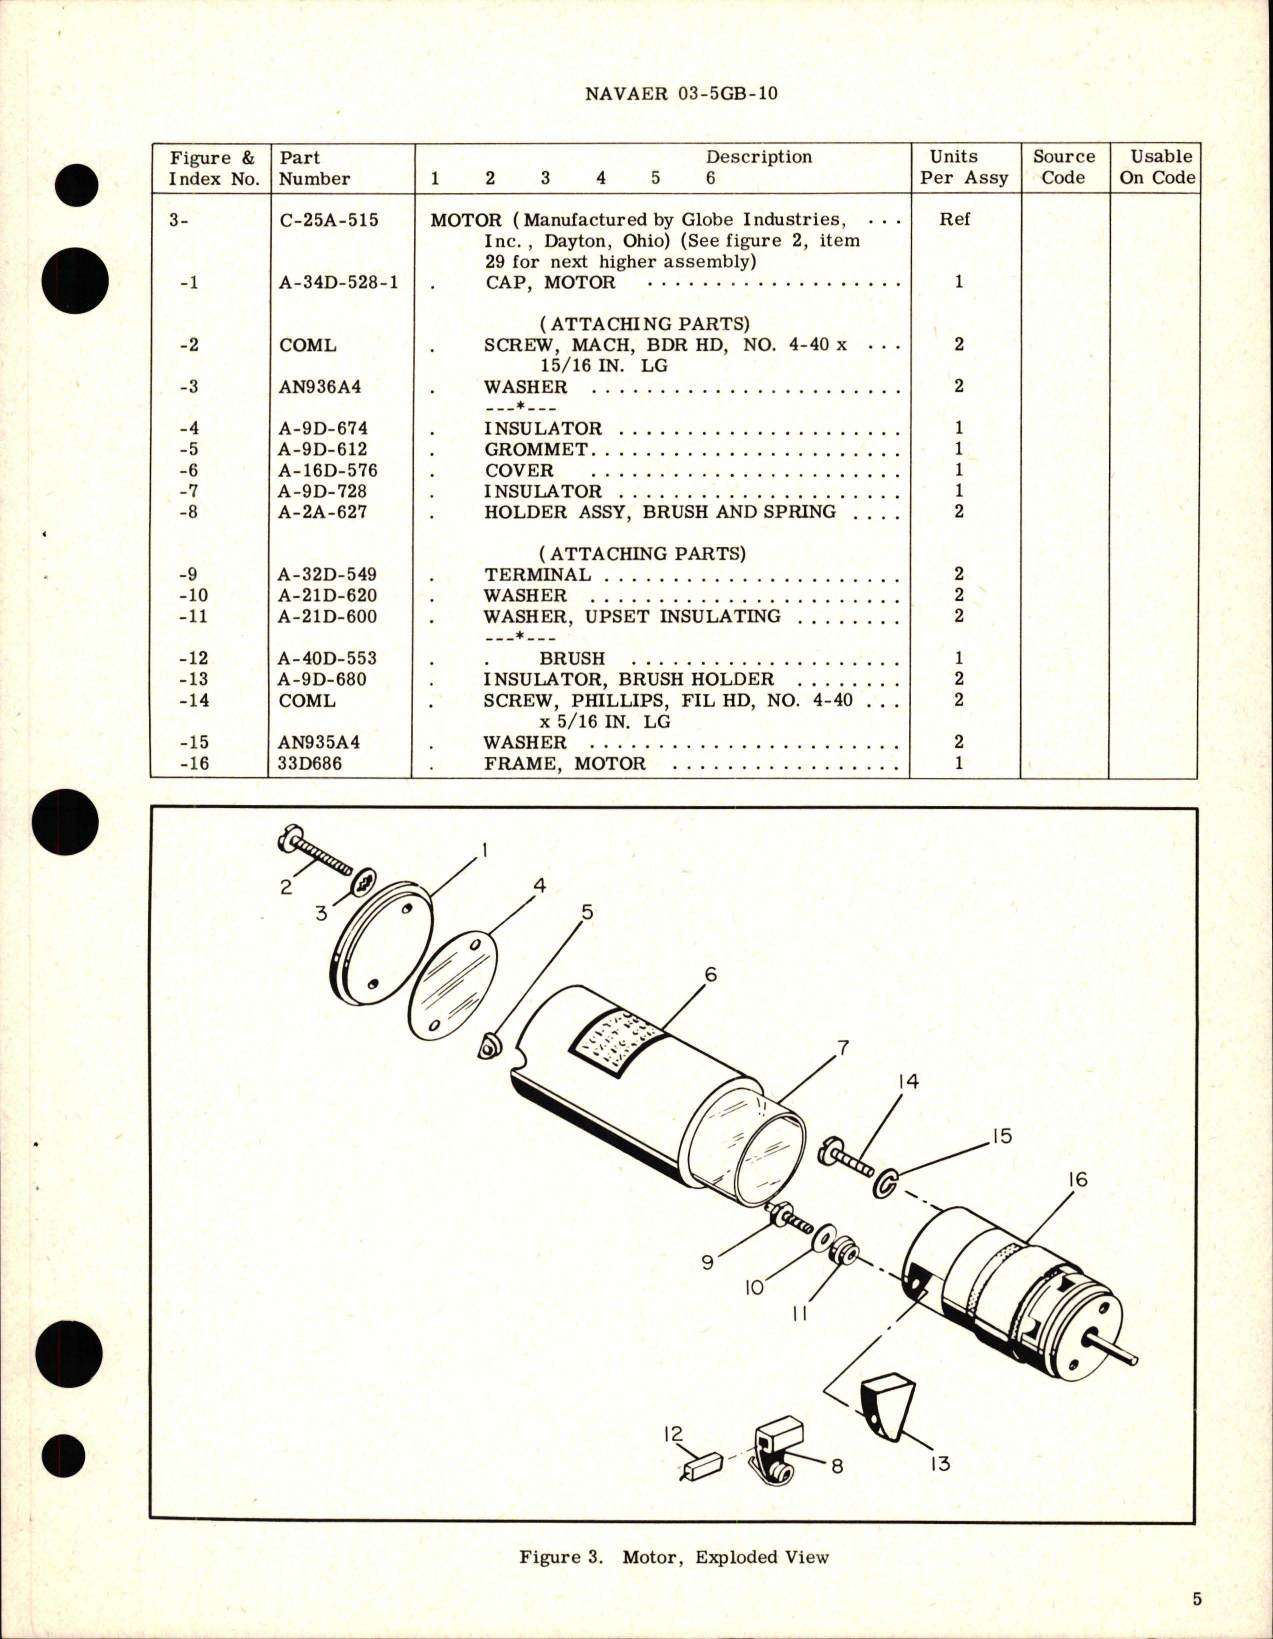 Sample page 5 from AirCorps Library document: Overhaul Instructions with Parts Breakdown for Navigational Rotating Warning Light 